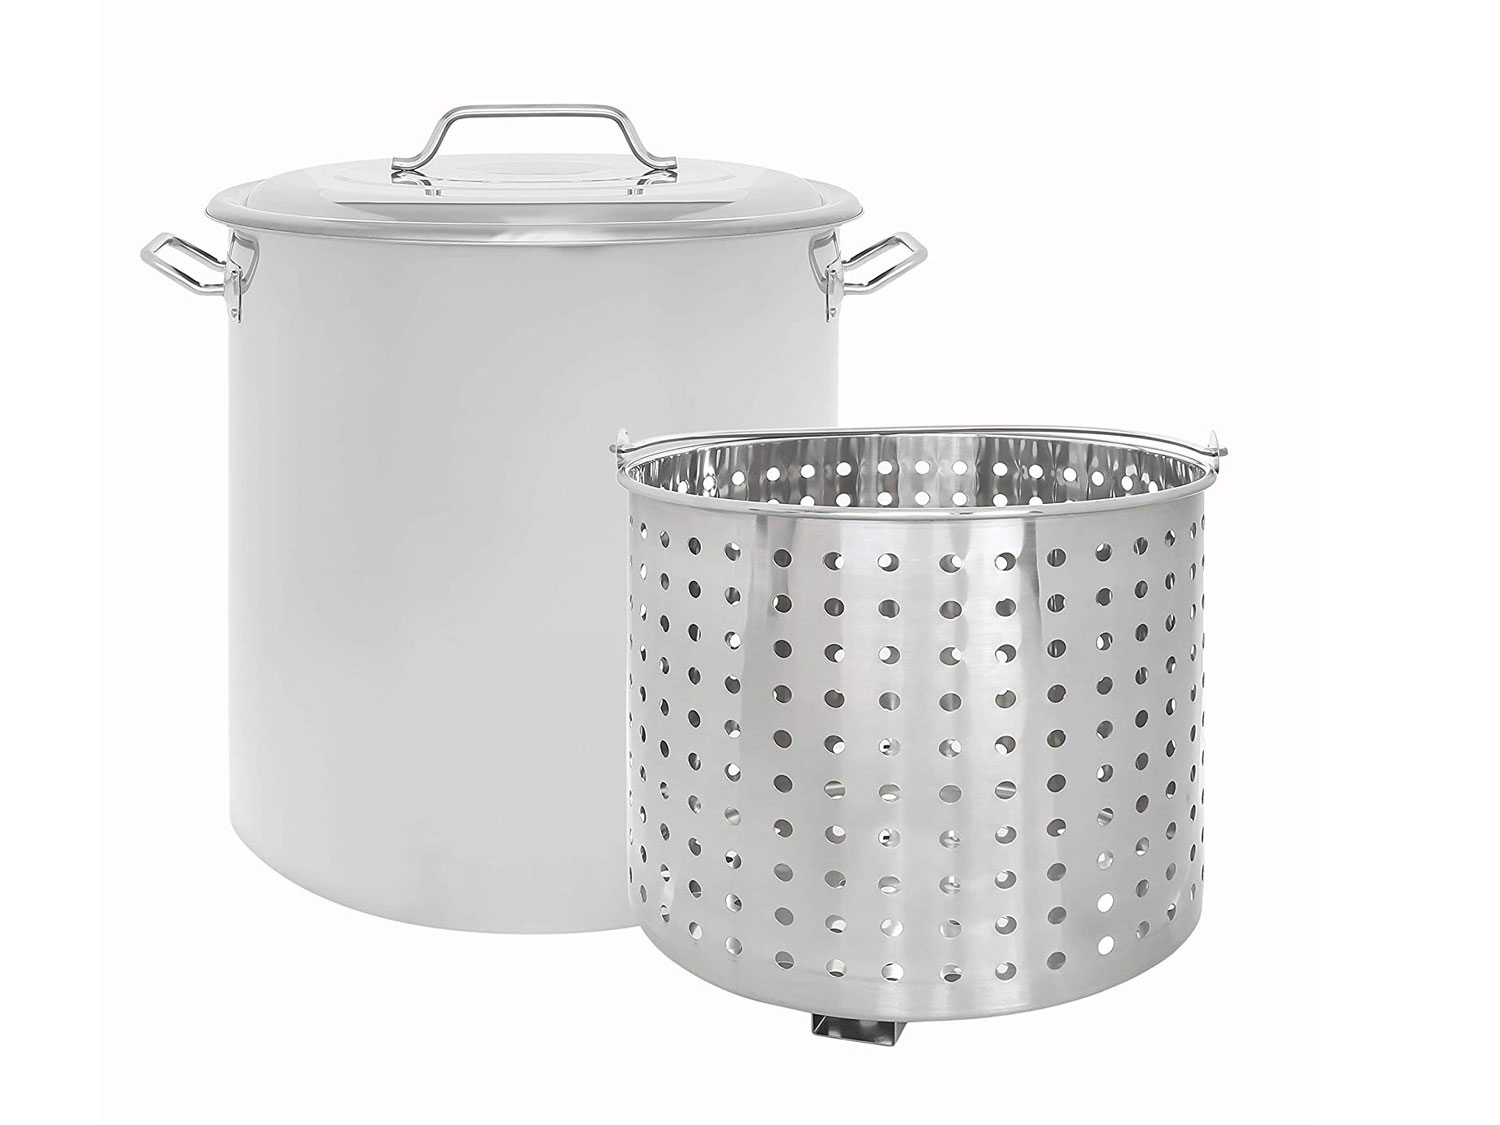 Concord Cookware stainless steel boiling pot